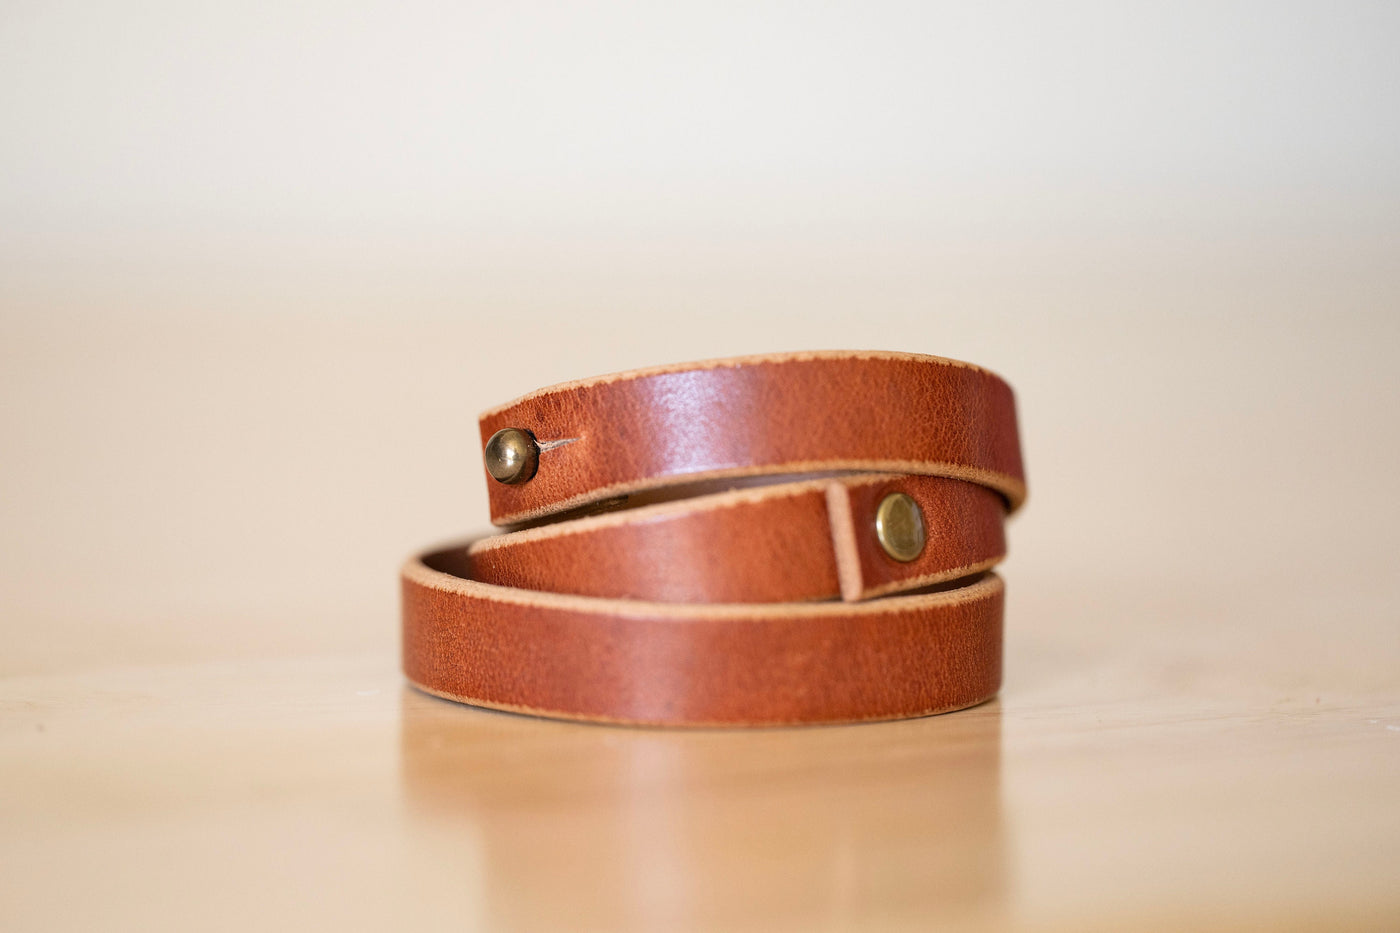 Leather Wrap Bracelet Handmade - Boho Style Cuff - Bordeaux Red Leather + Antique Brass - Personalized Gift For Her - Mens Bracelet